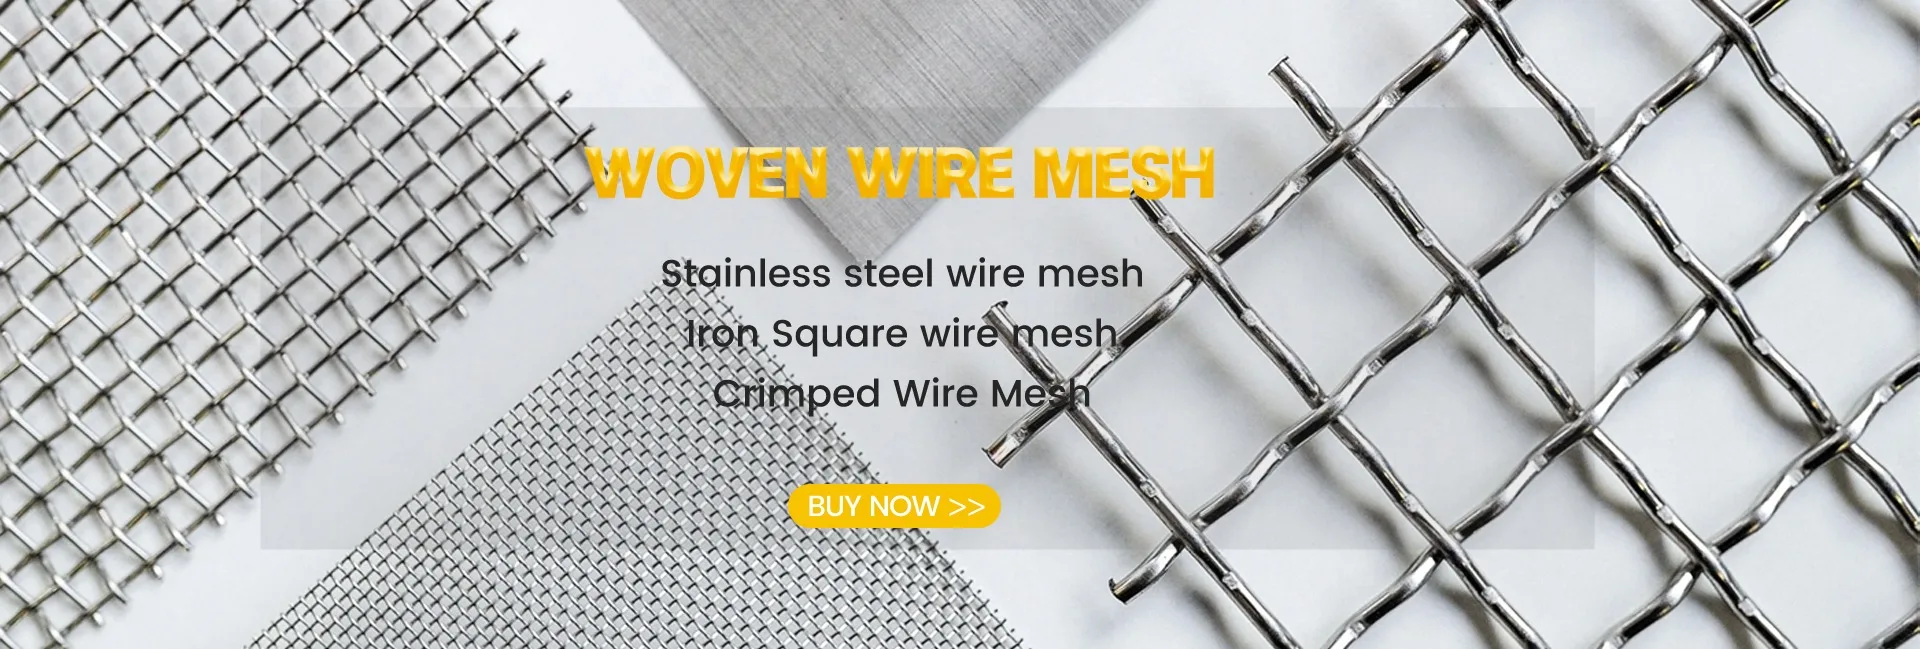 stainless steel wire mesh,square woven wire mesh,iron wire mesh,Crimped Wire Mesh,Stainless Steel Filter Belts